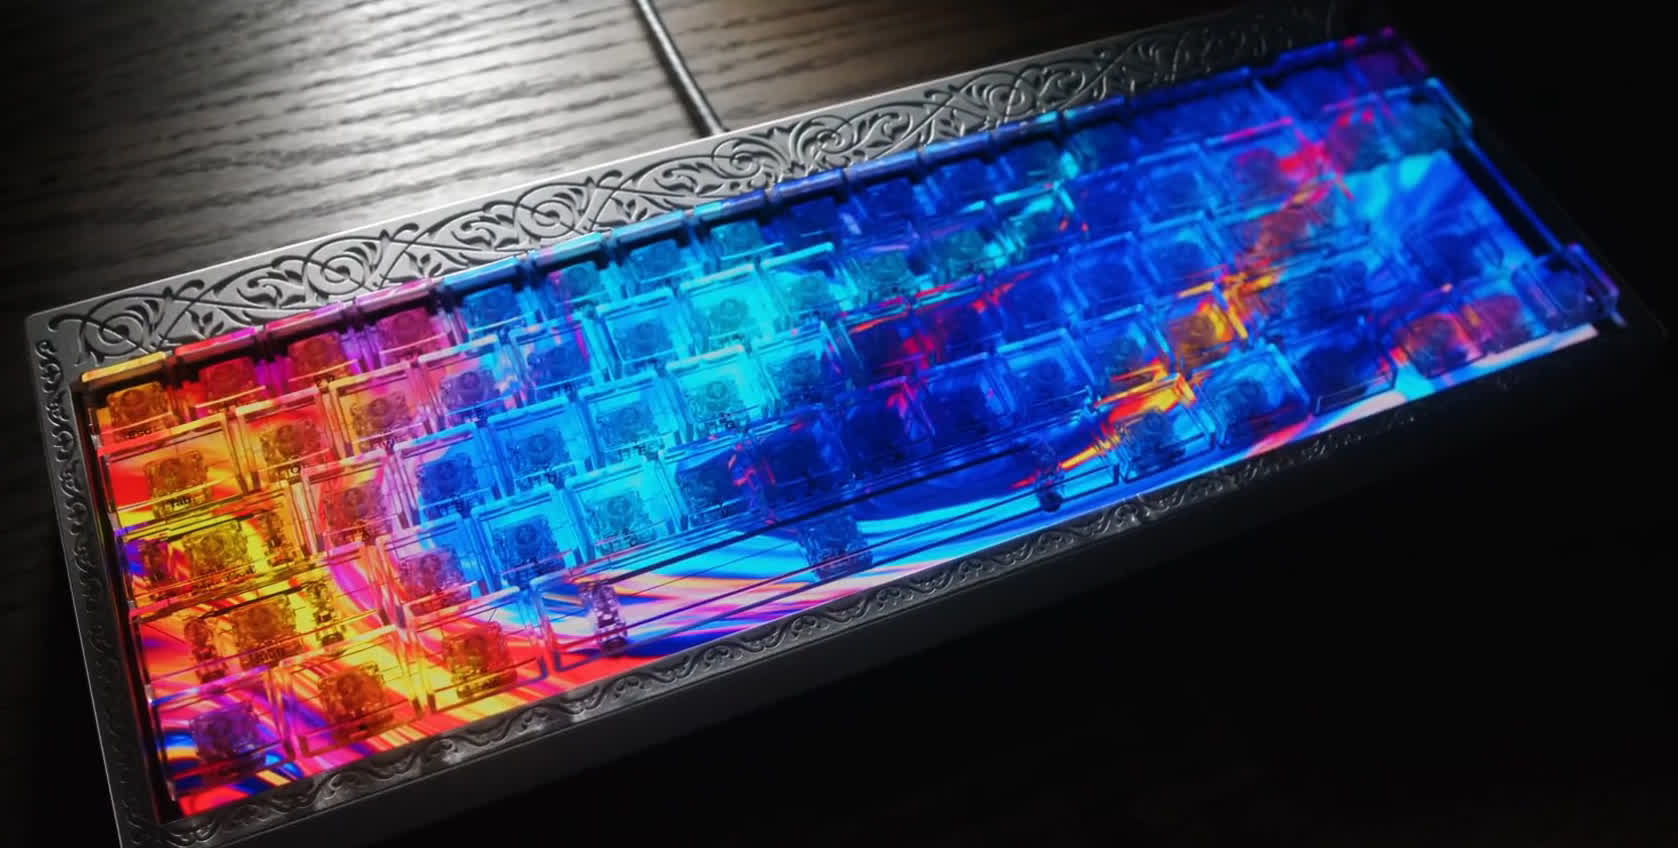 Centerpiece is a mechanical keyboard with a high-res display beneath transparent keys